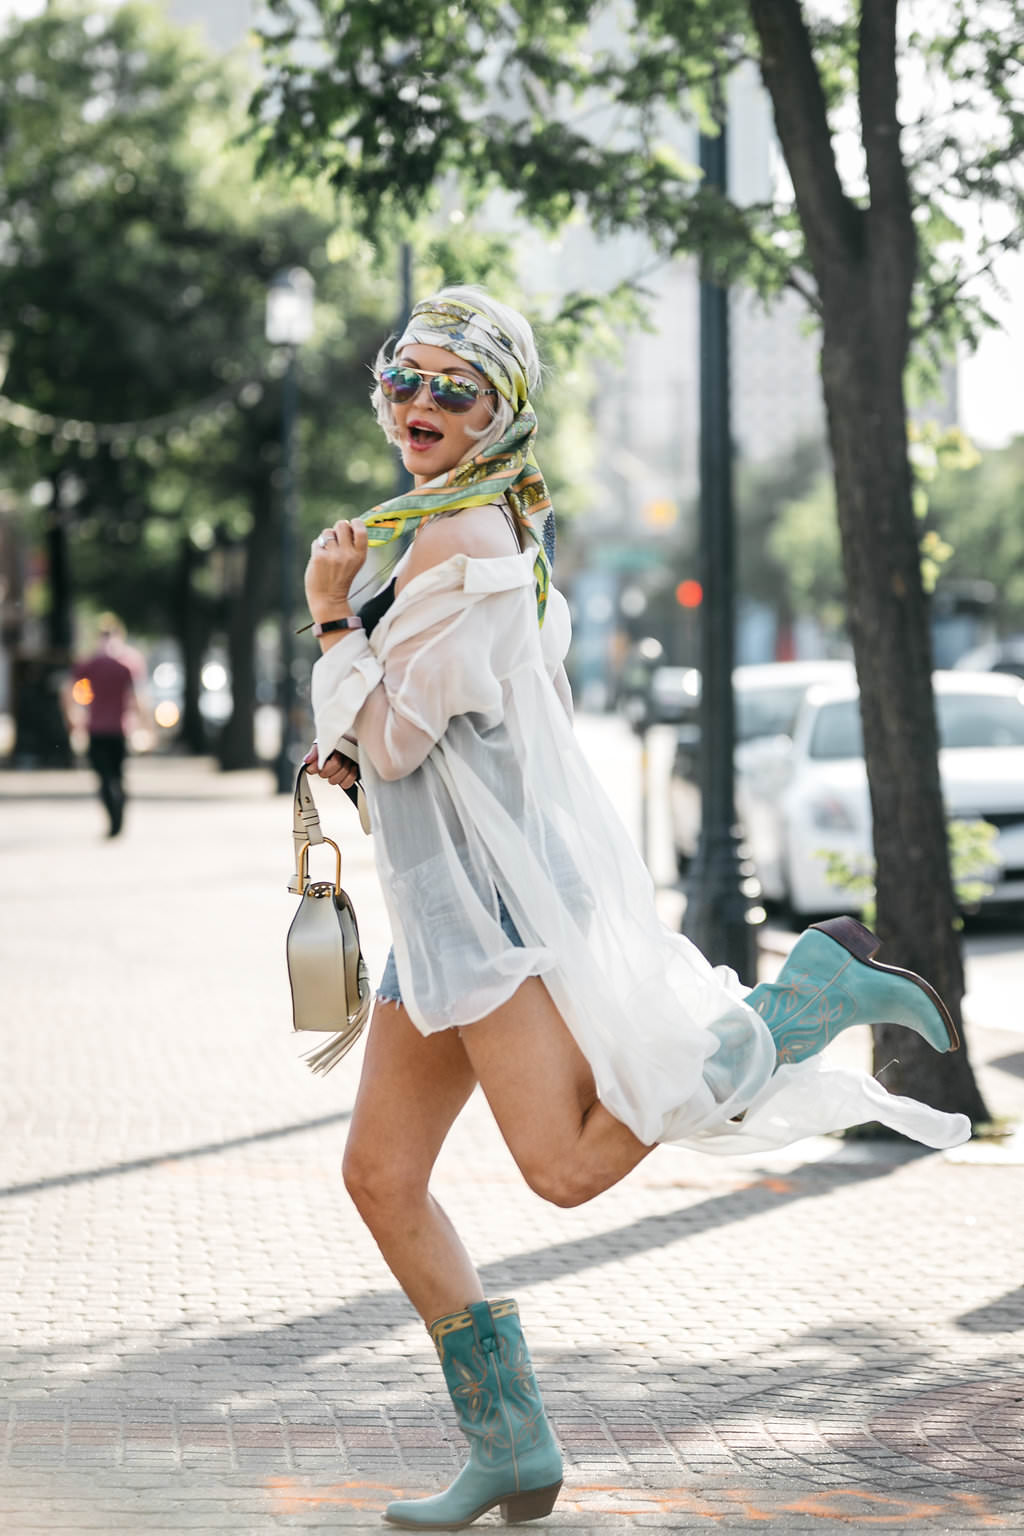 Coachella summer style - head scarf and cowboy boots